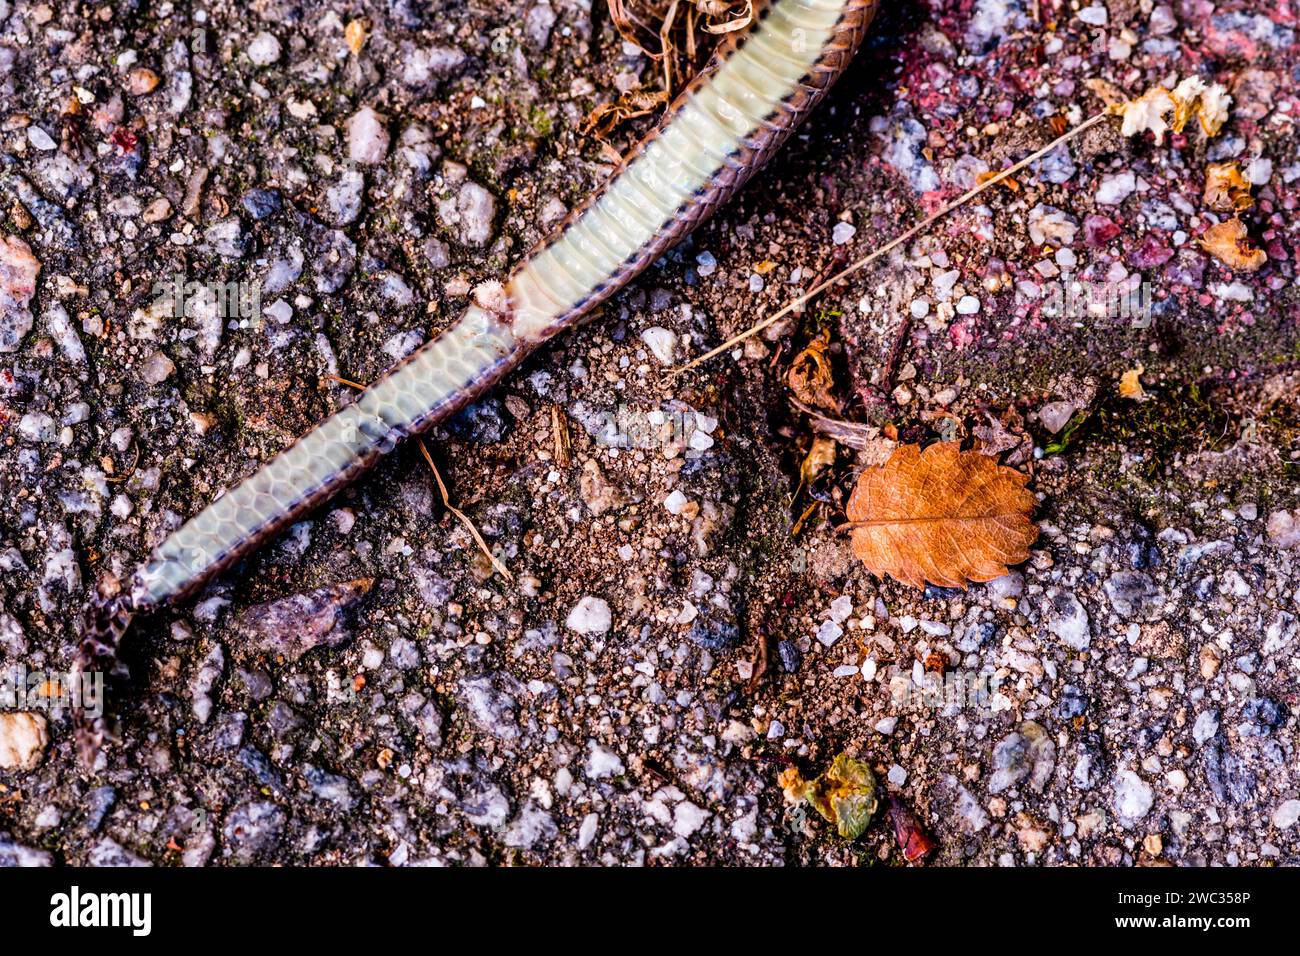 Carcass of dead snake laying on brick sidewalk Stock Photo